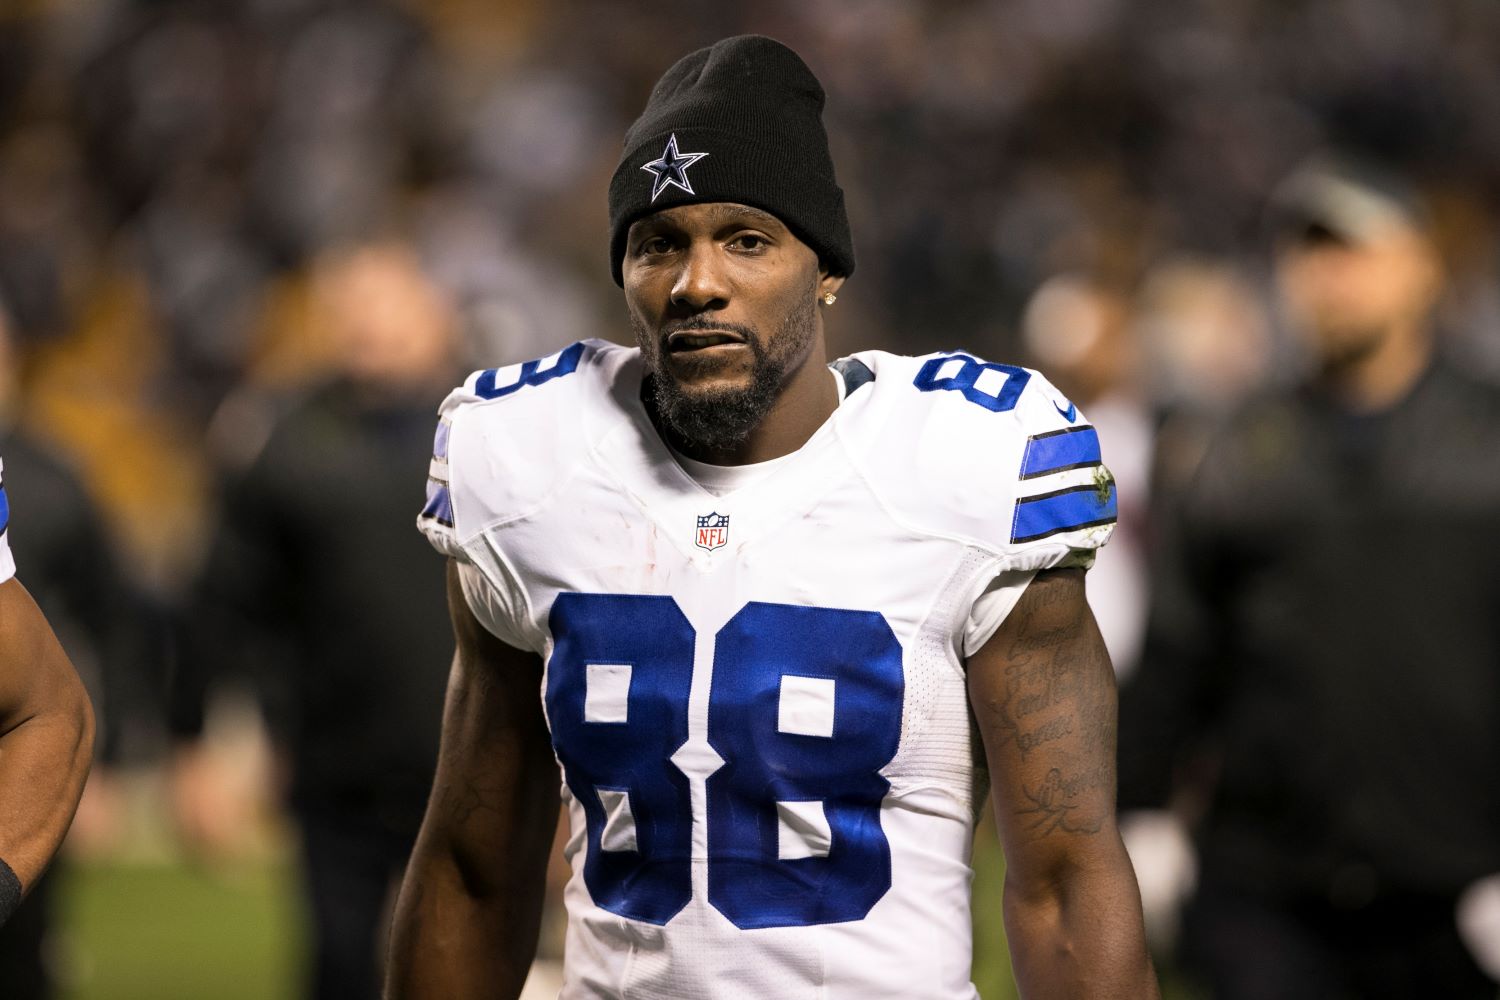 Ravens WR Dez Bryant Suffered a Tragic Loss With the Unexpected Death of His Father